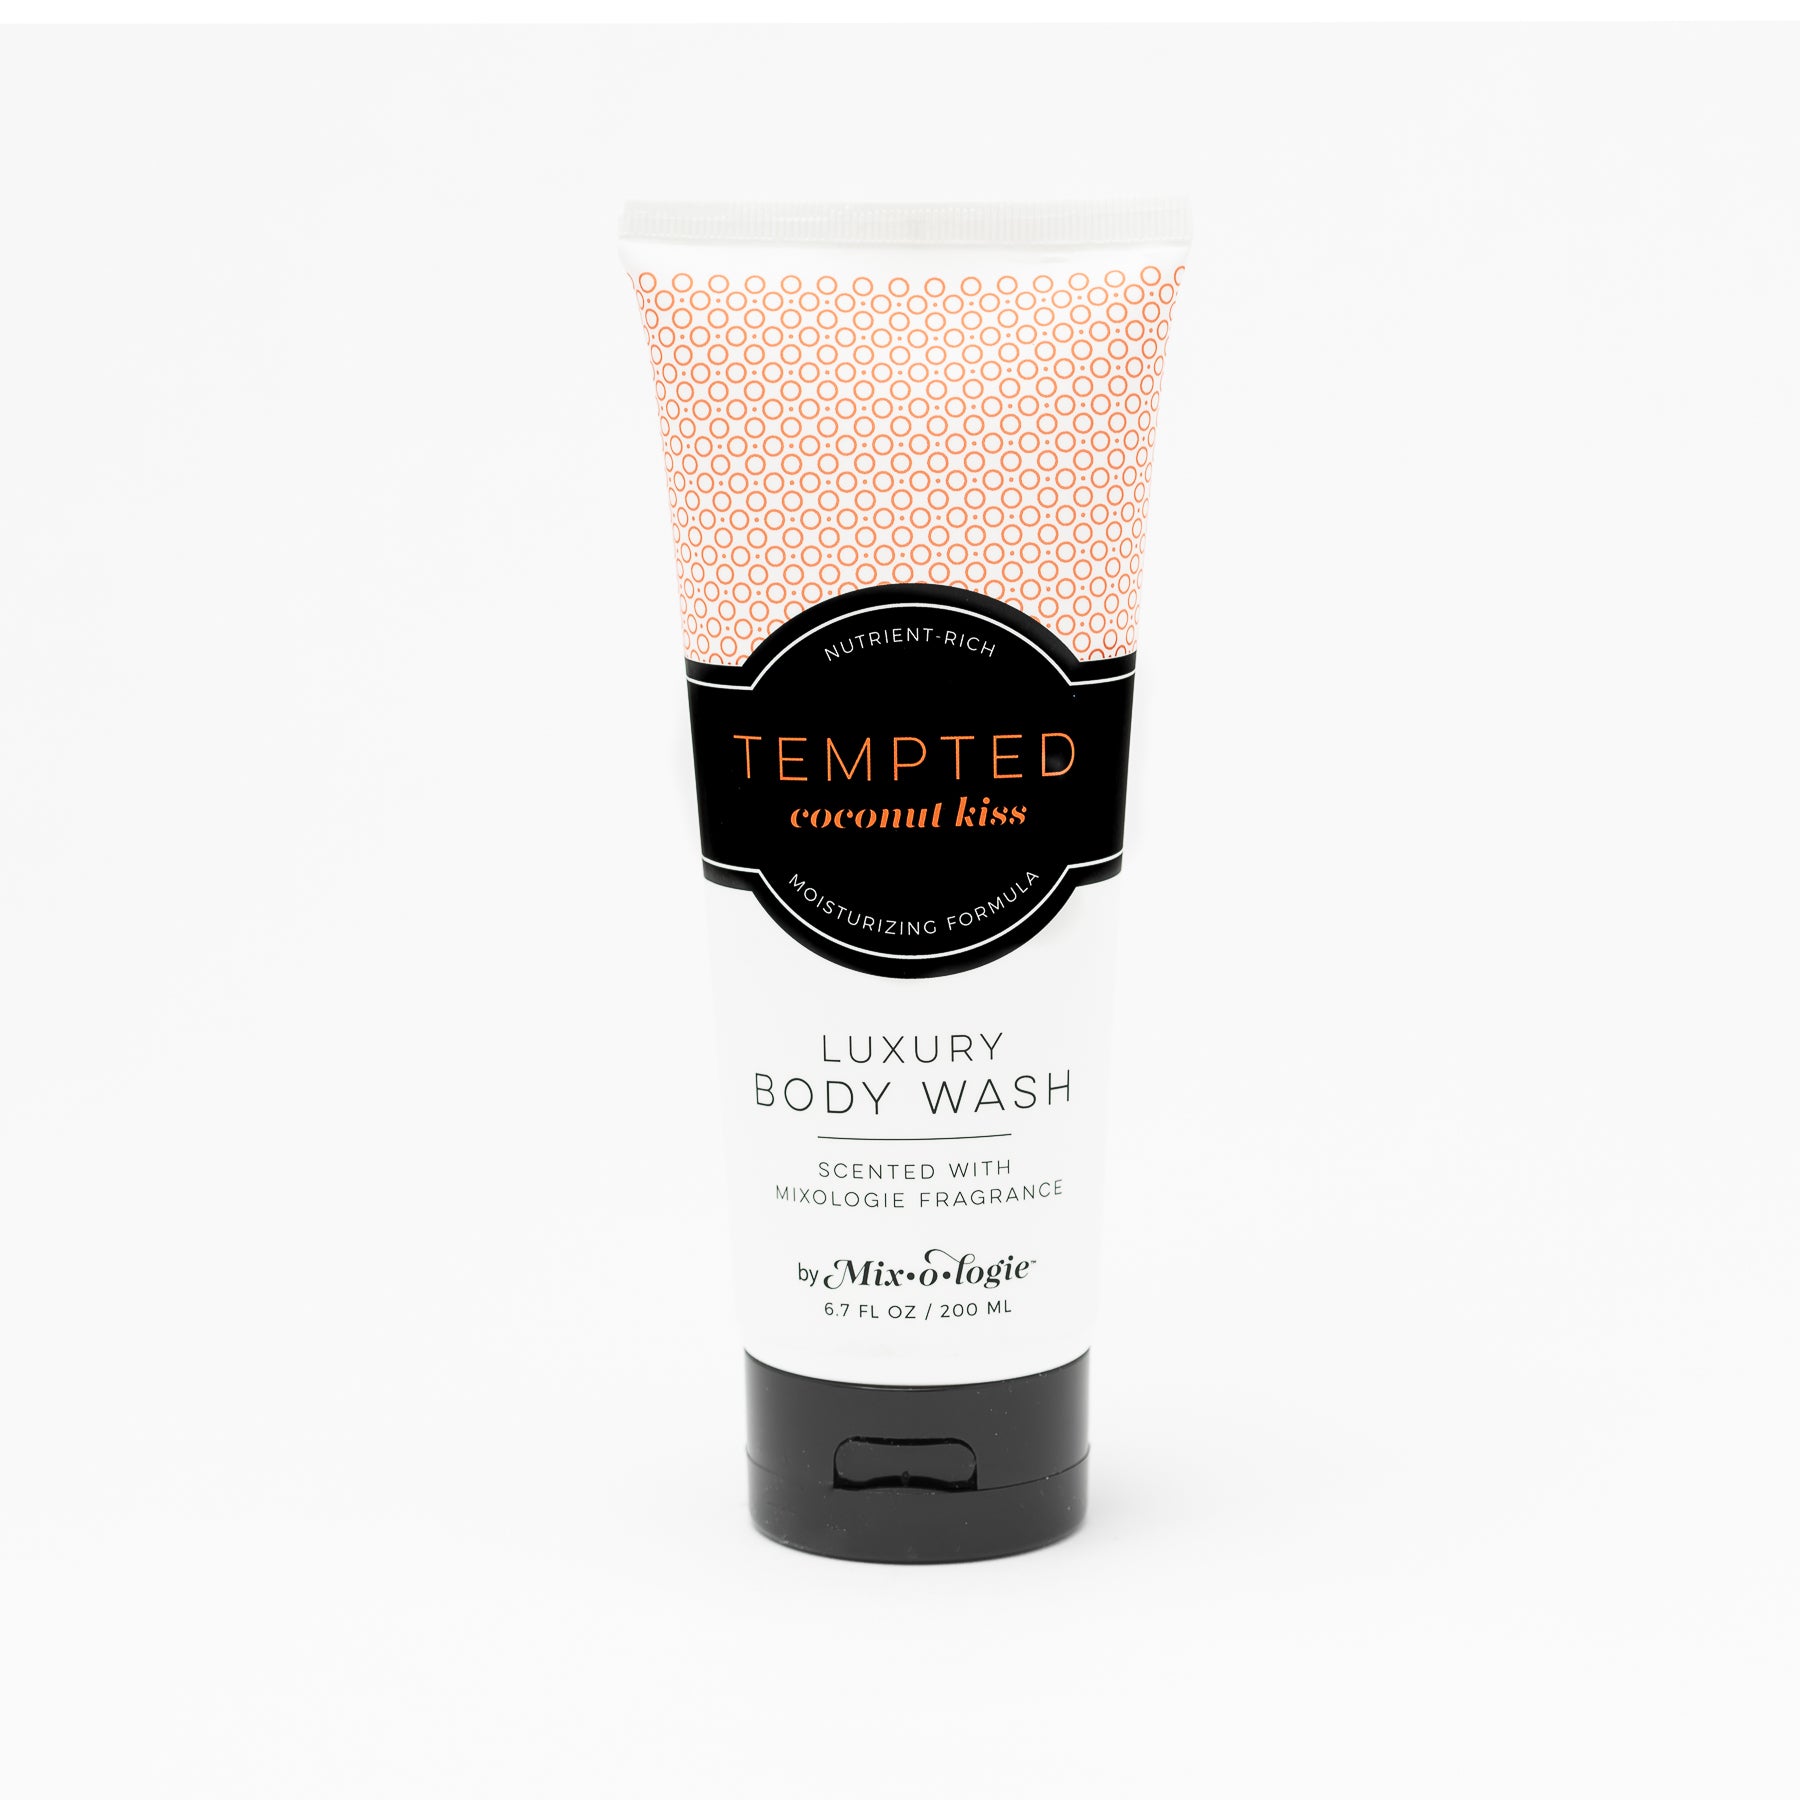 Luxury Body Wash in Mixologie’s Tempted (Coconut Kiss) in peach color sample package with black label. Contains 6.7 fl oz or 200 mL pictured on a white background. 